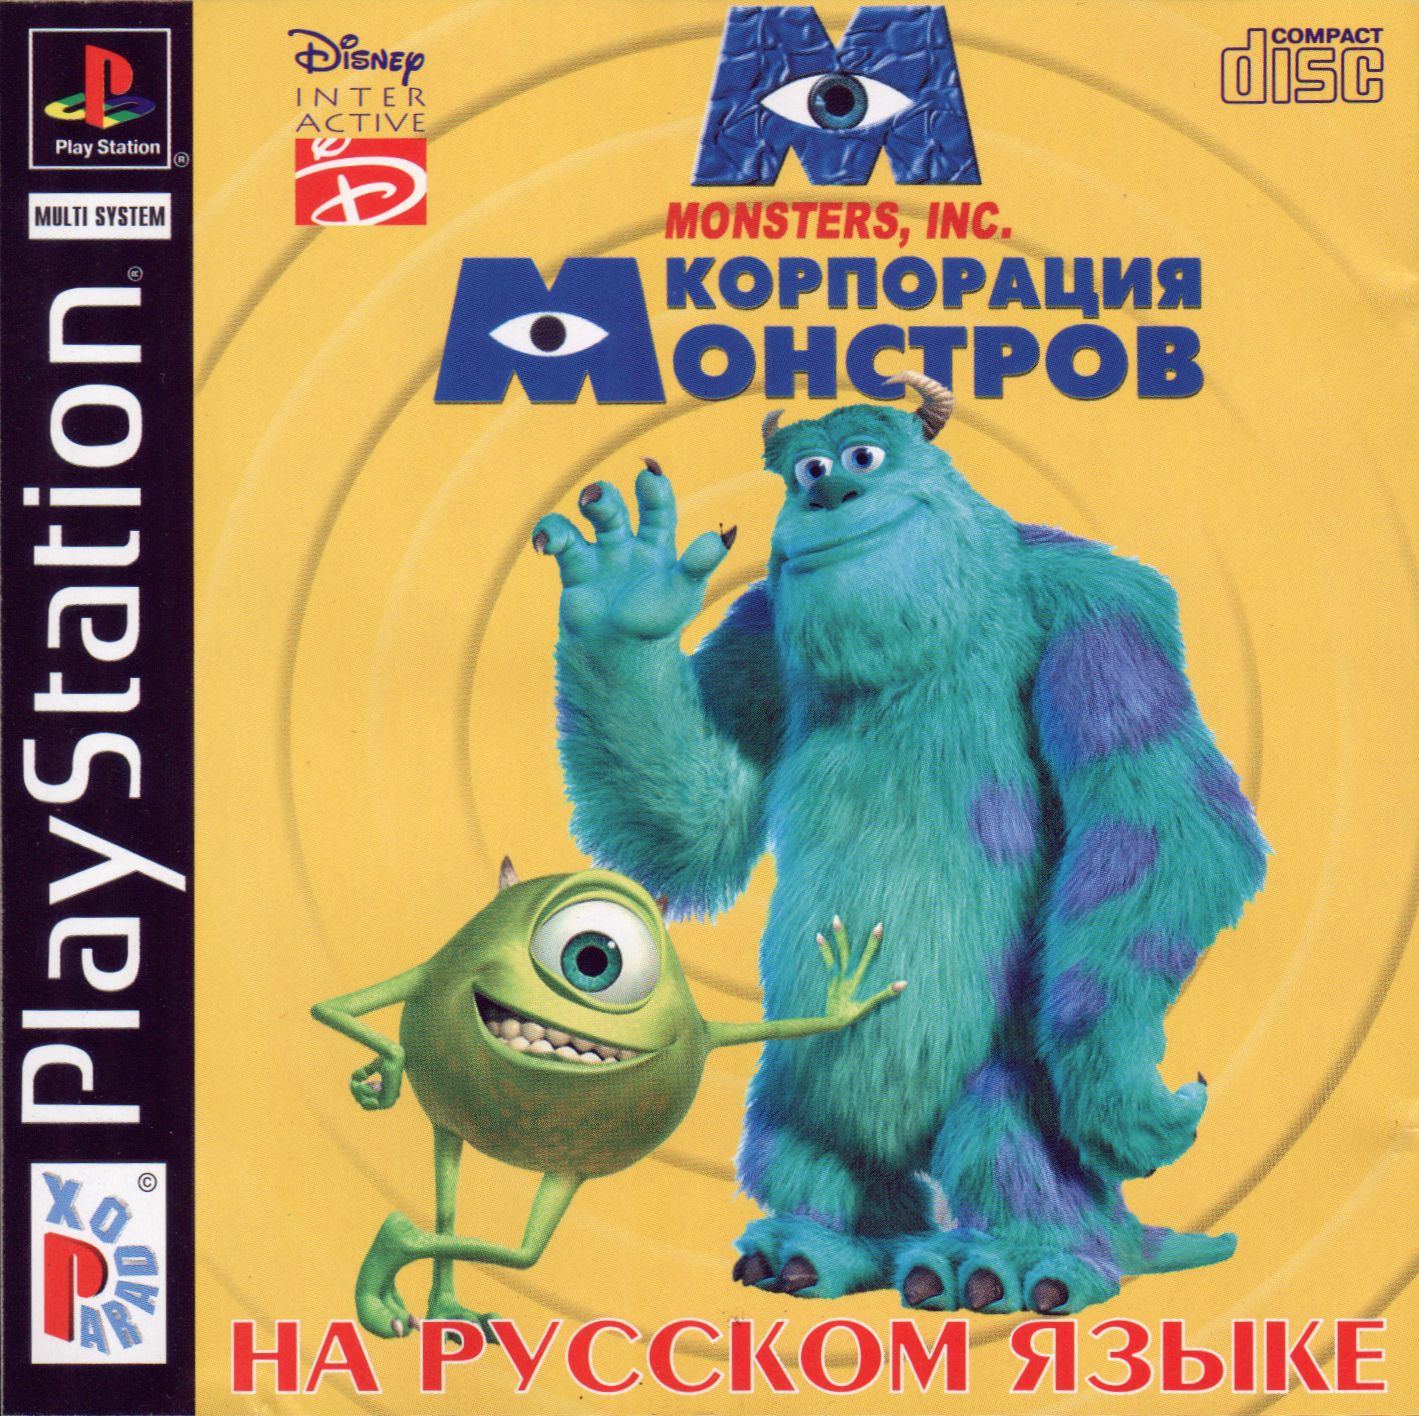 Monsters, Inc. Scream Team [PS1] - Playing the cartoon by Pixar and Disney